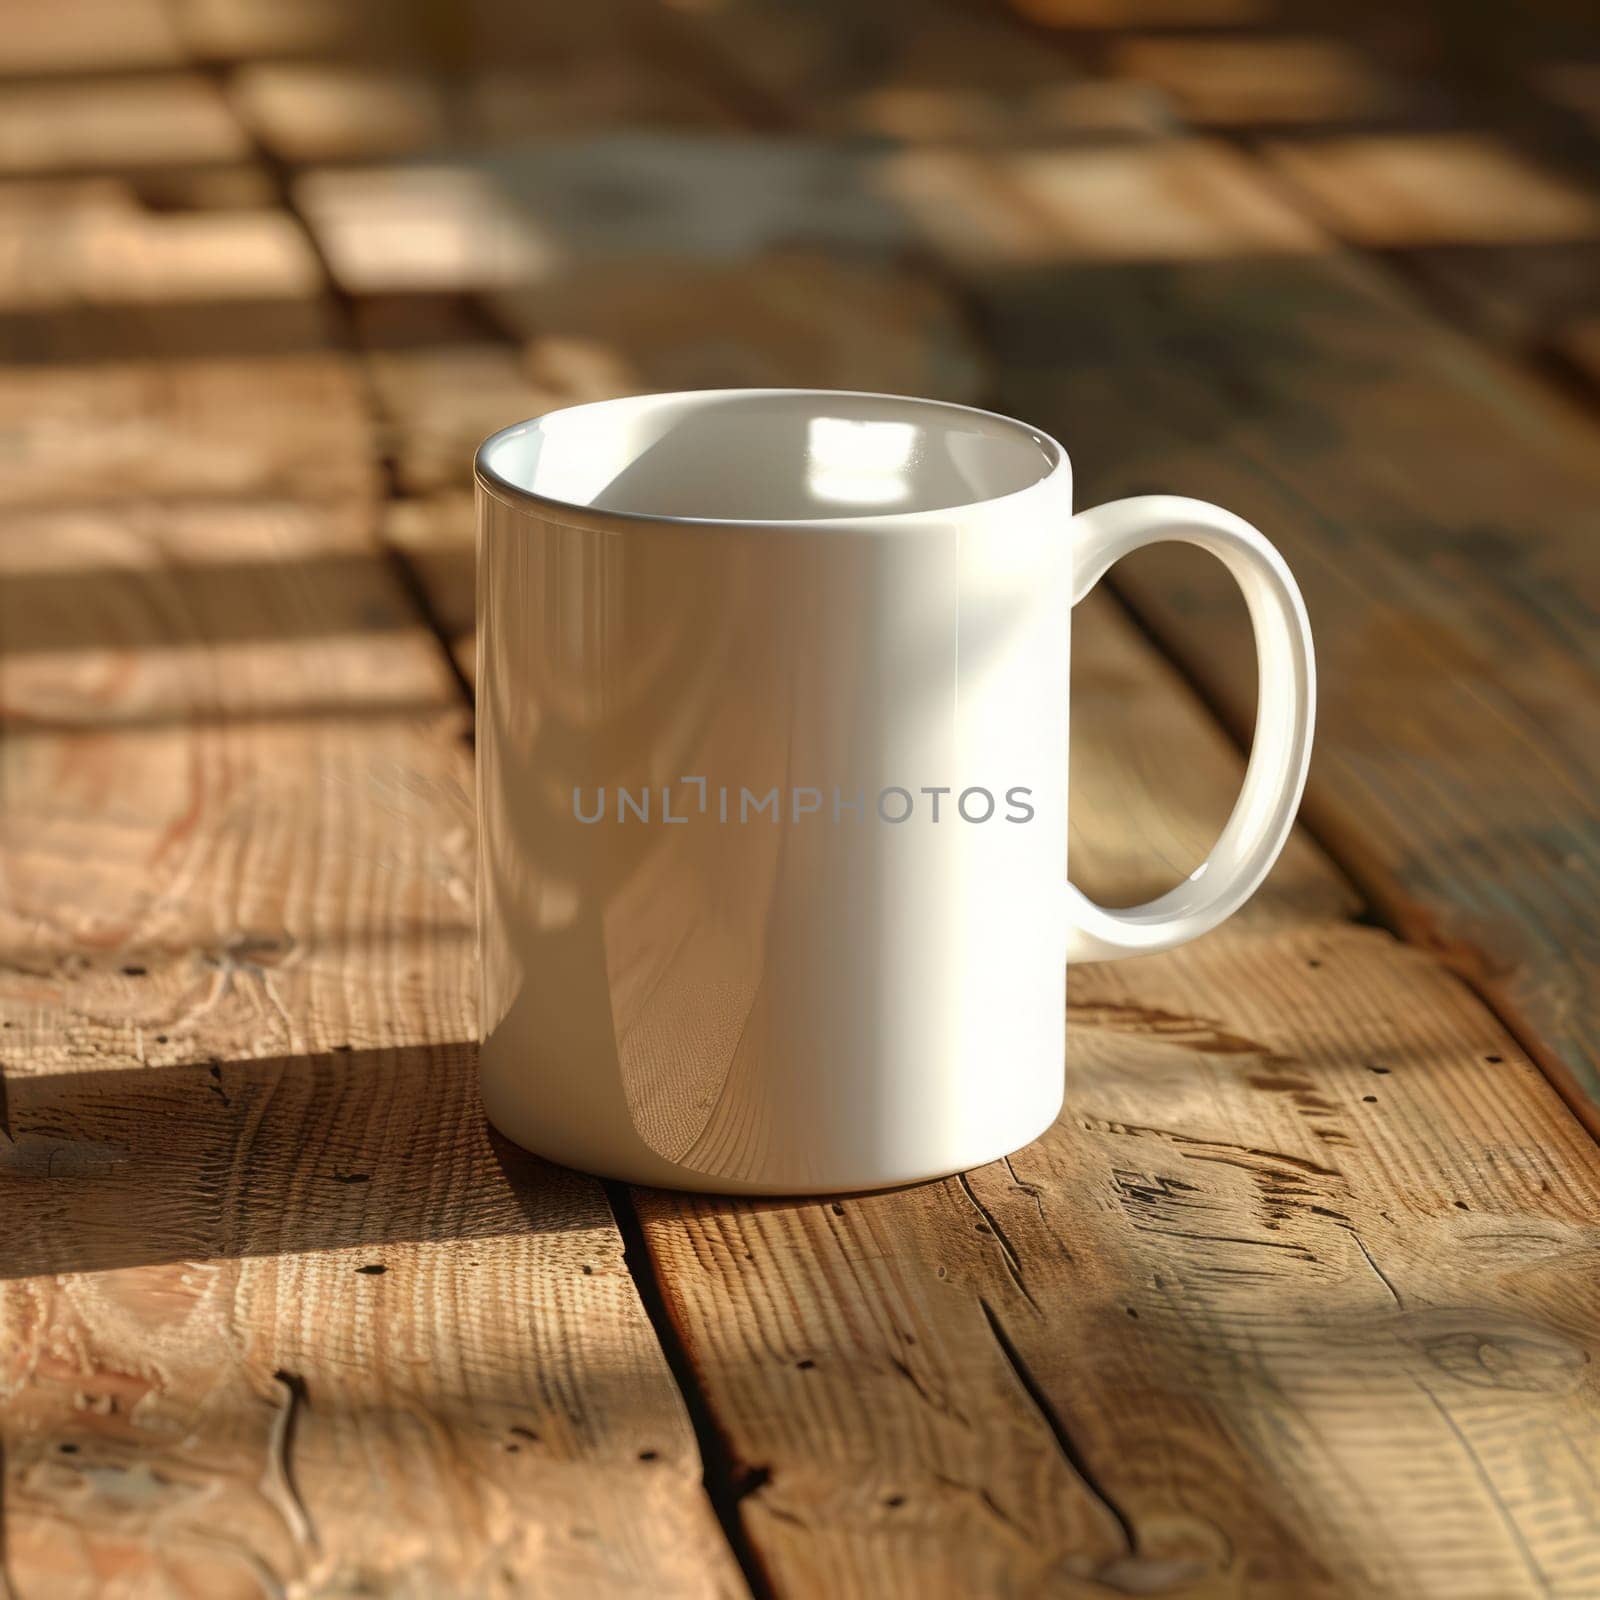 White coffee mug for mock up on wooden table background. Mockup and copy space concept